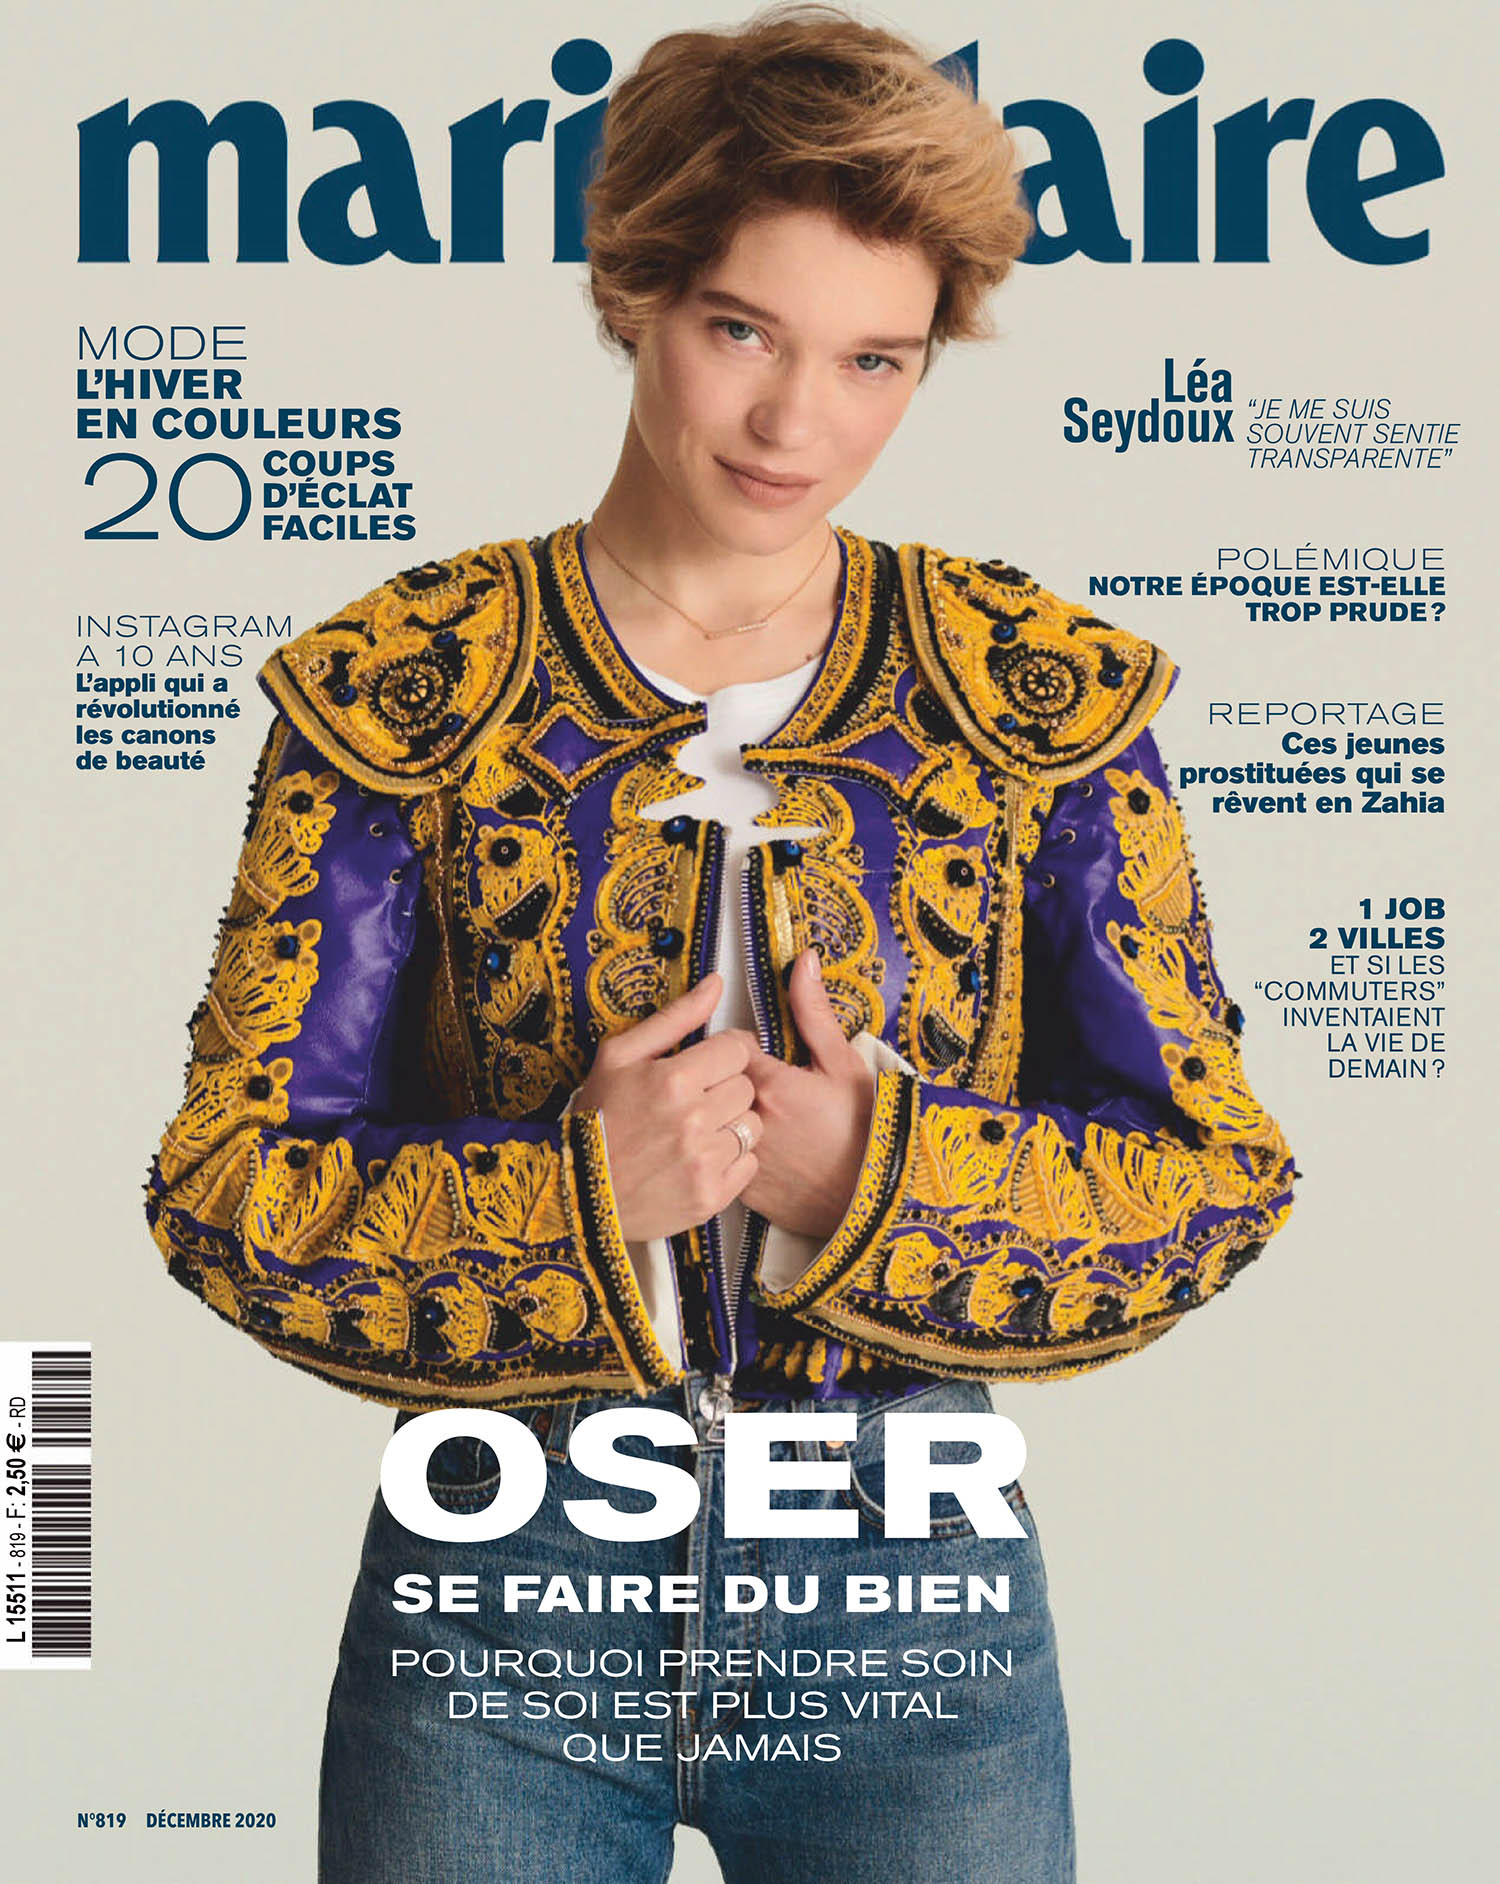 Léa Seydoux covers Marie Claire France December 2020 by Philip Gay